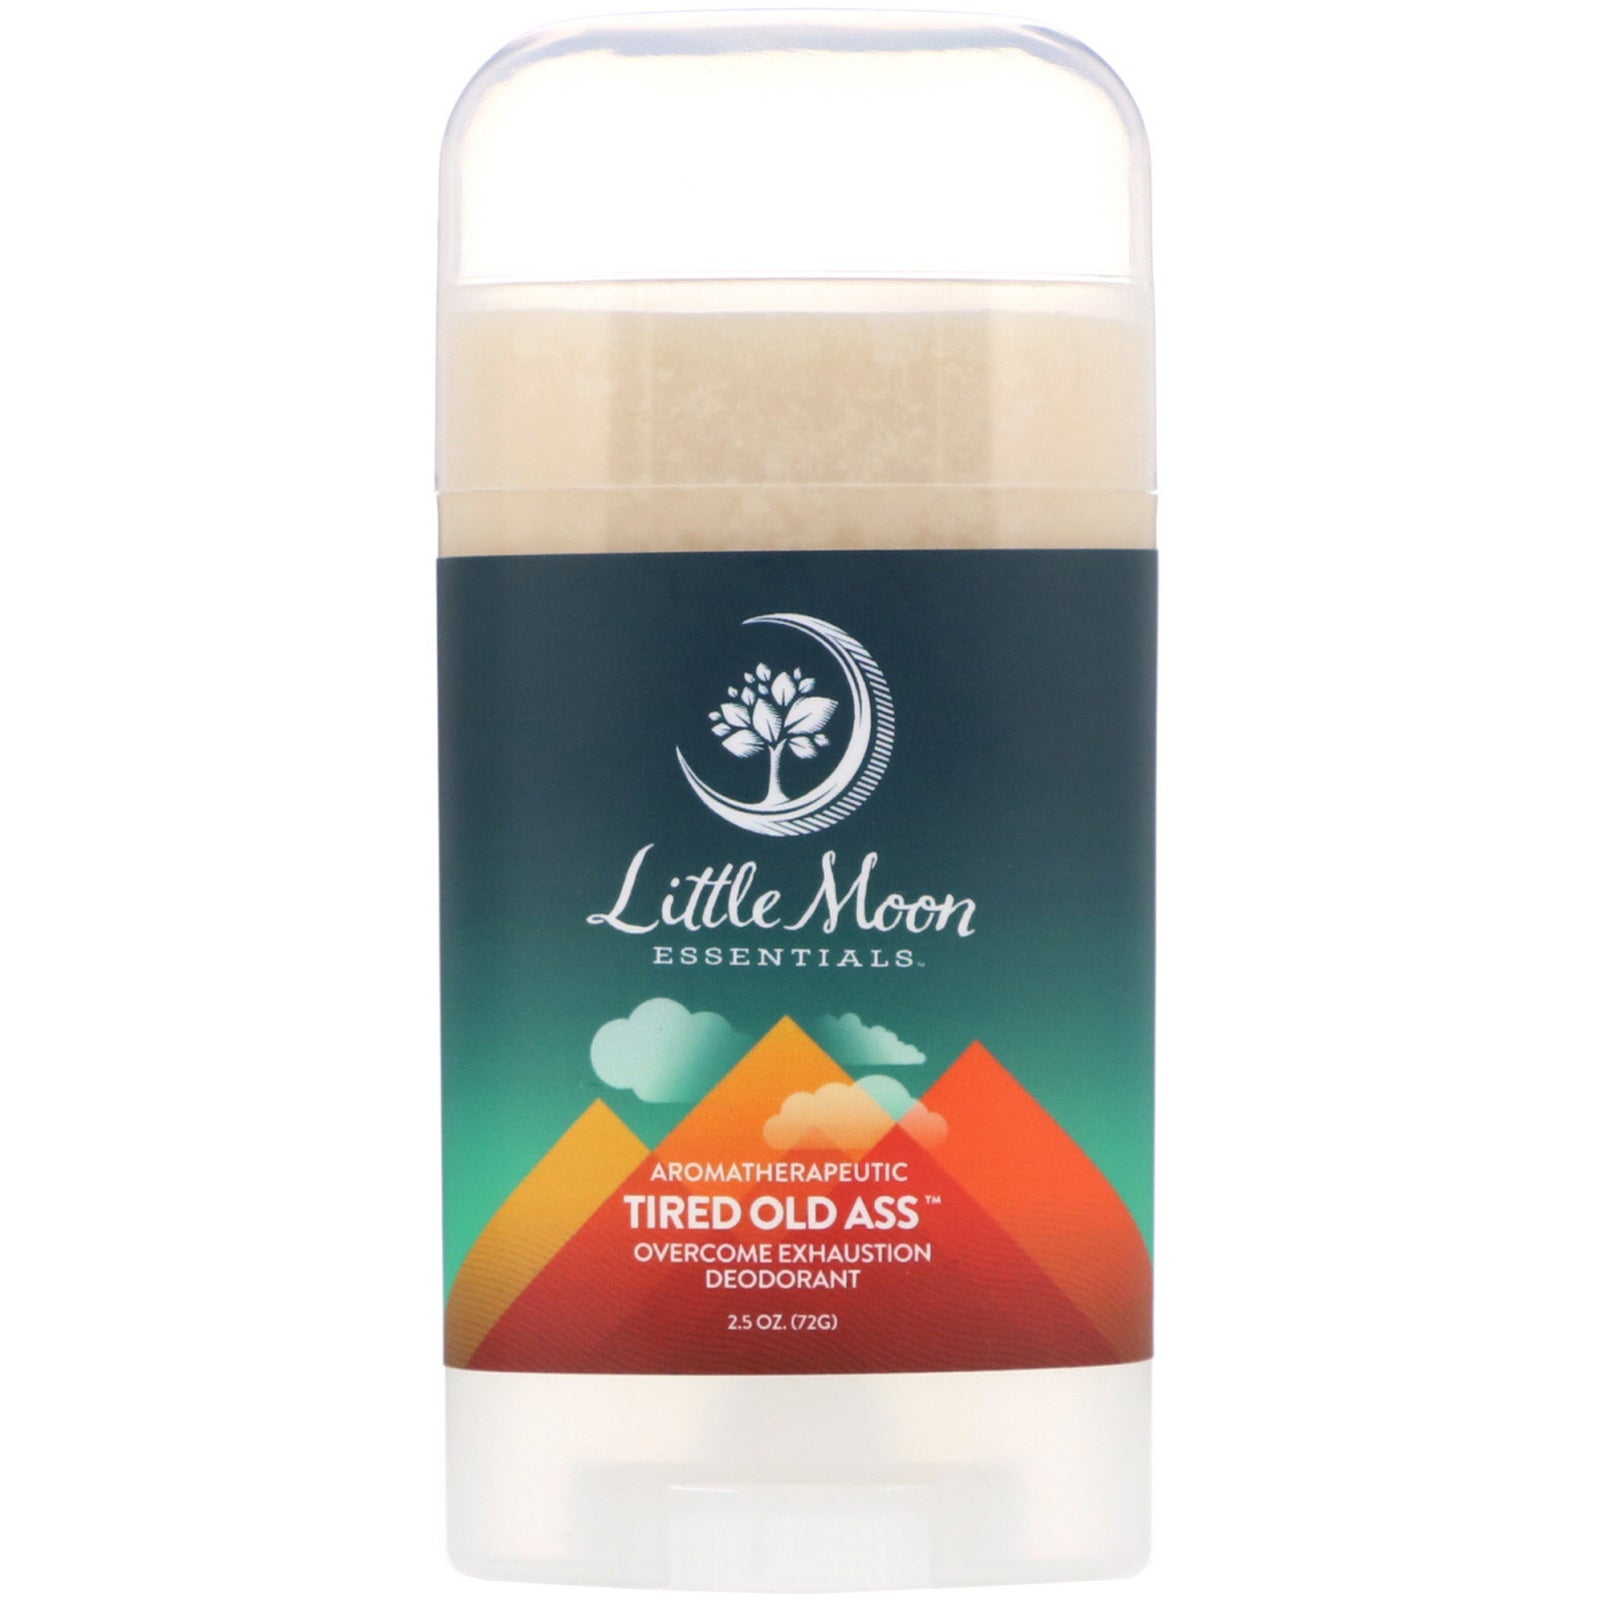 Little Moon Essentials, Tired Old Ass, Overcome Exhaustion Deodorant, 2.5 oz (72 g)